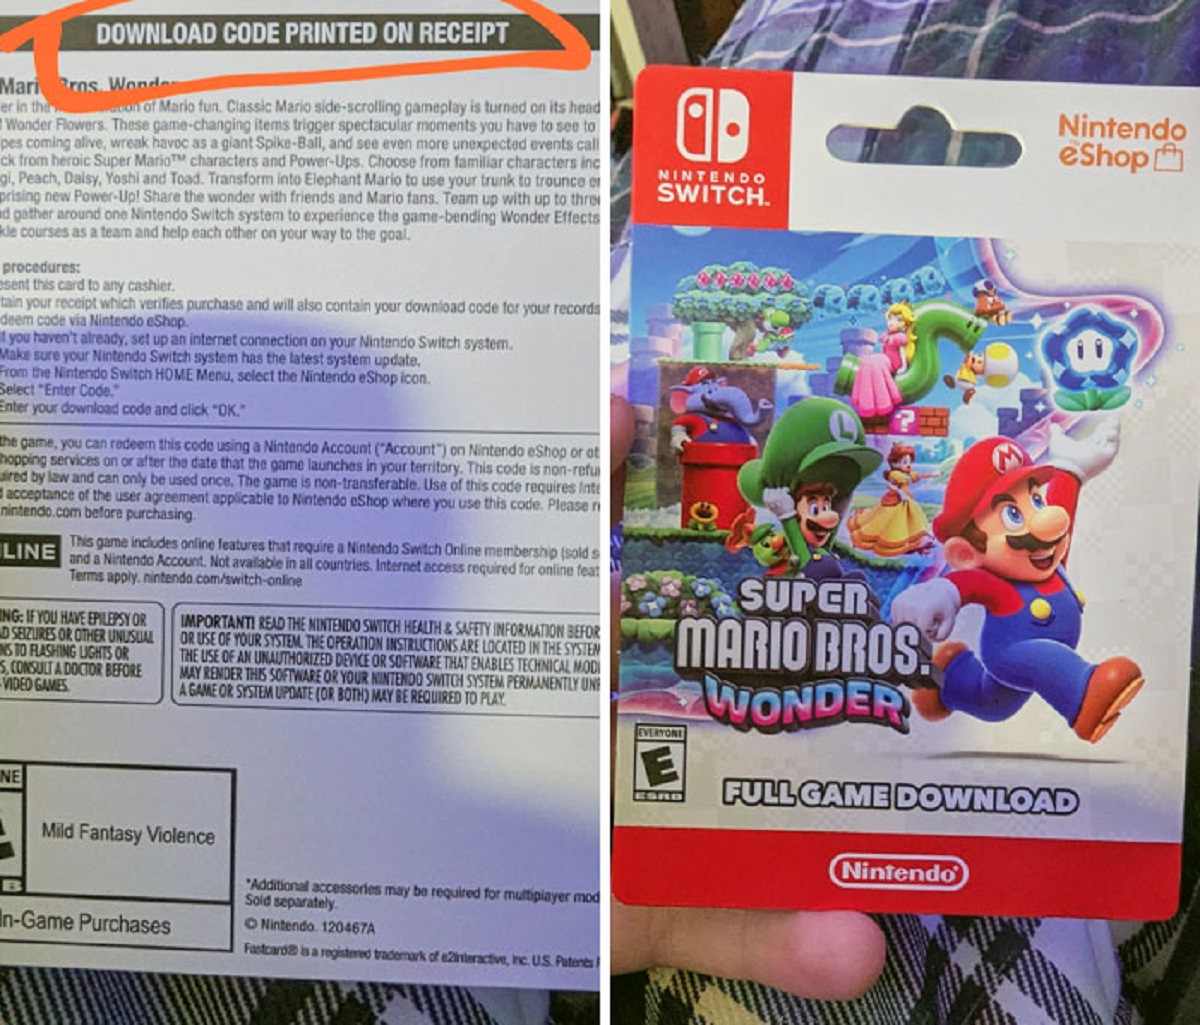 My Friend Bought Me A Switch Game For My Birthday. The Download Code, Instead Of Being On The Card Itself, Is On The Receipt. He No Longer Has The Receipt